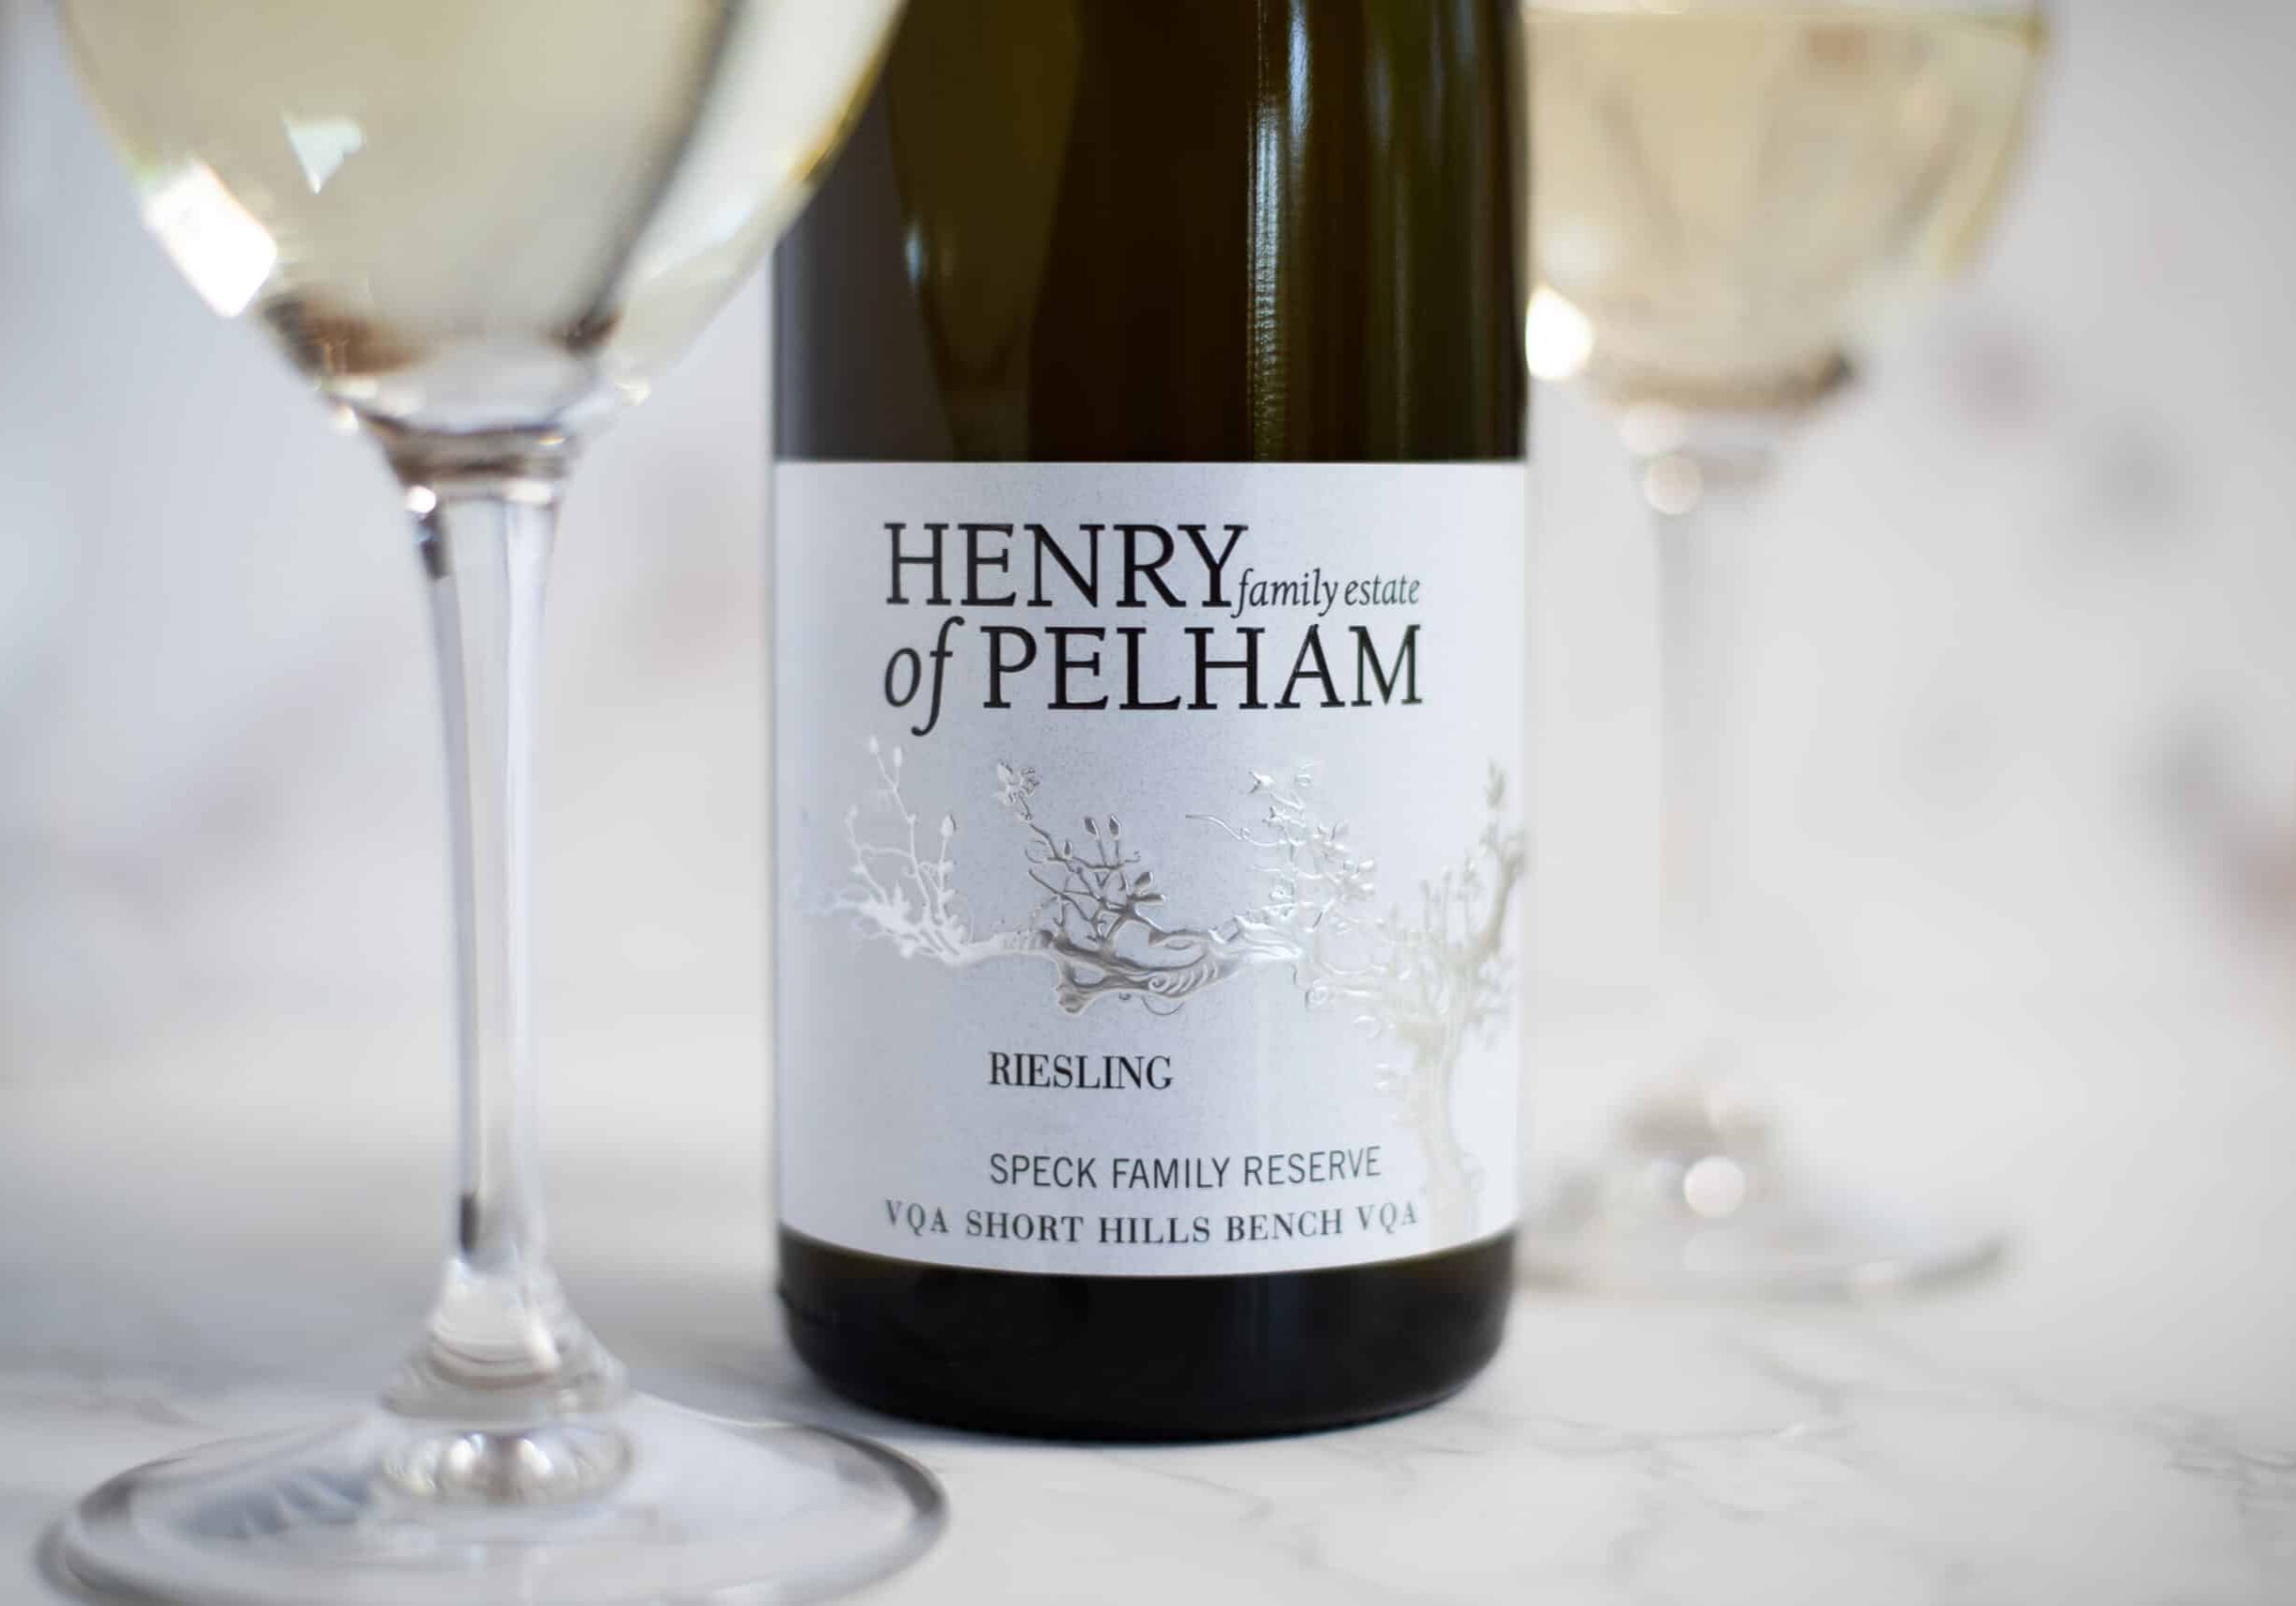 Henry of Pelham's Speck Family Reserve Riesling with two full wine glasses